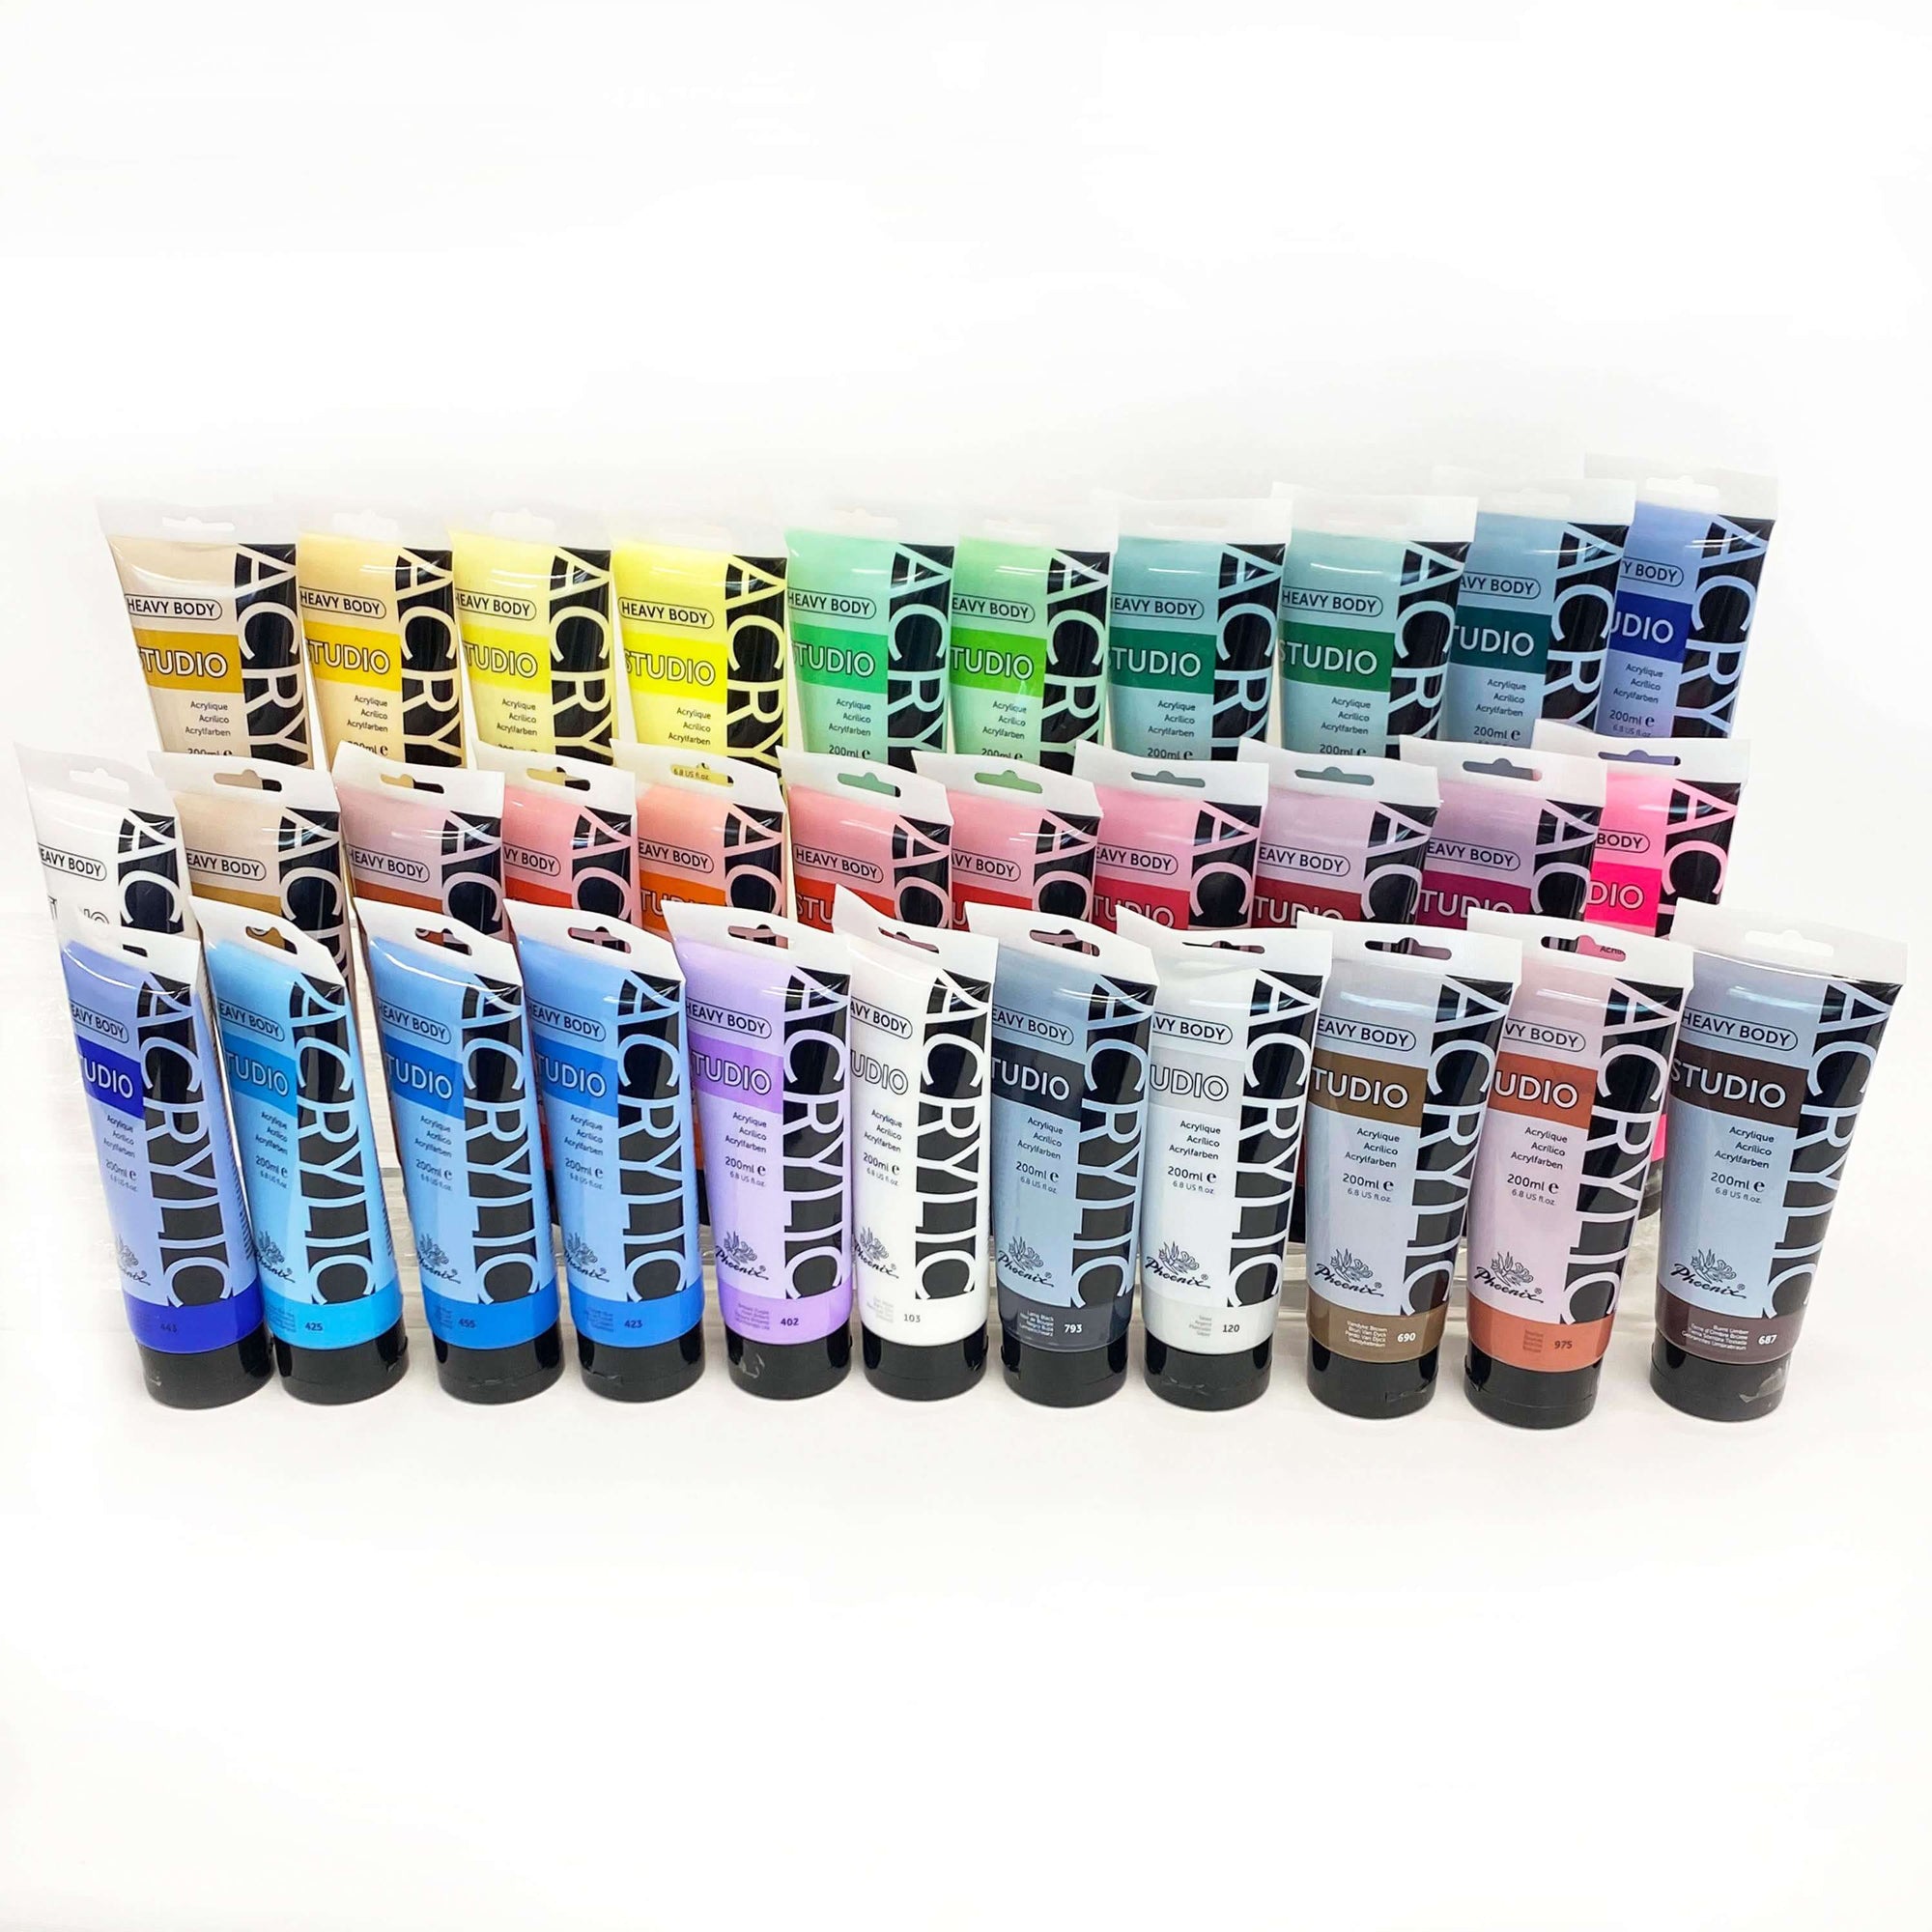 H&B 1200ML Professional acrylic paint pouring for wholesale, Acrylic Paint